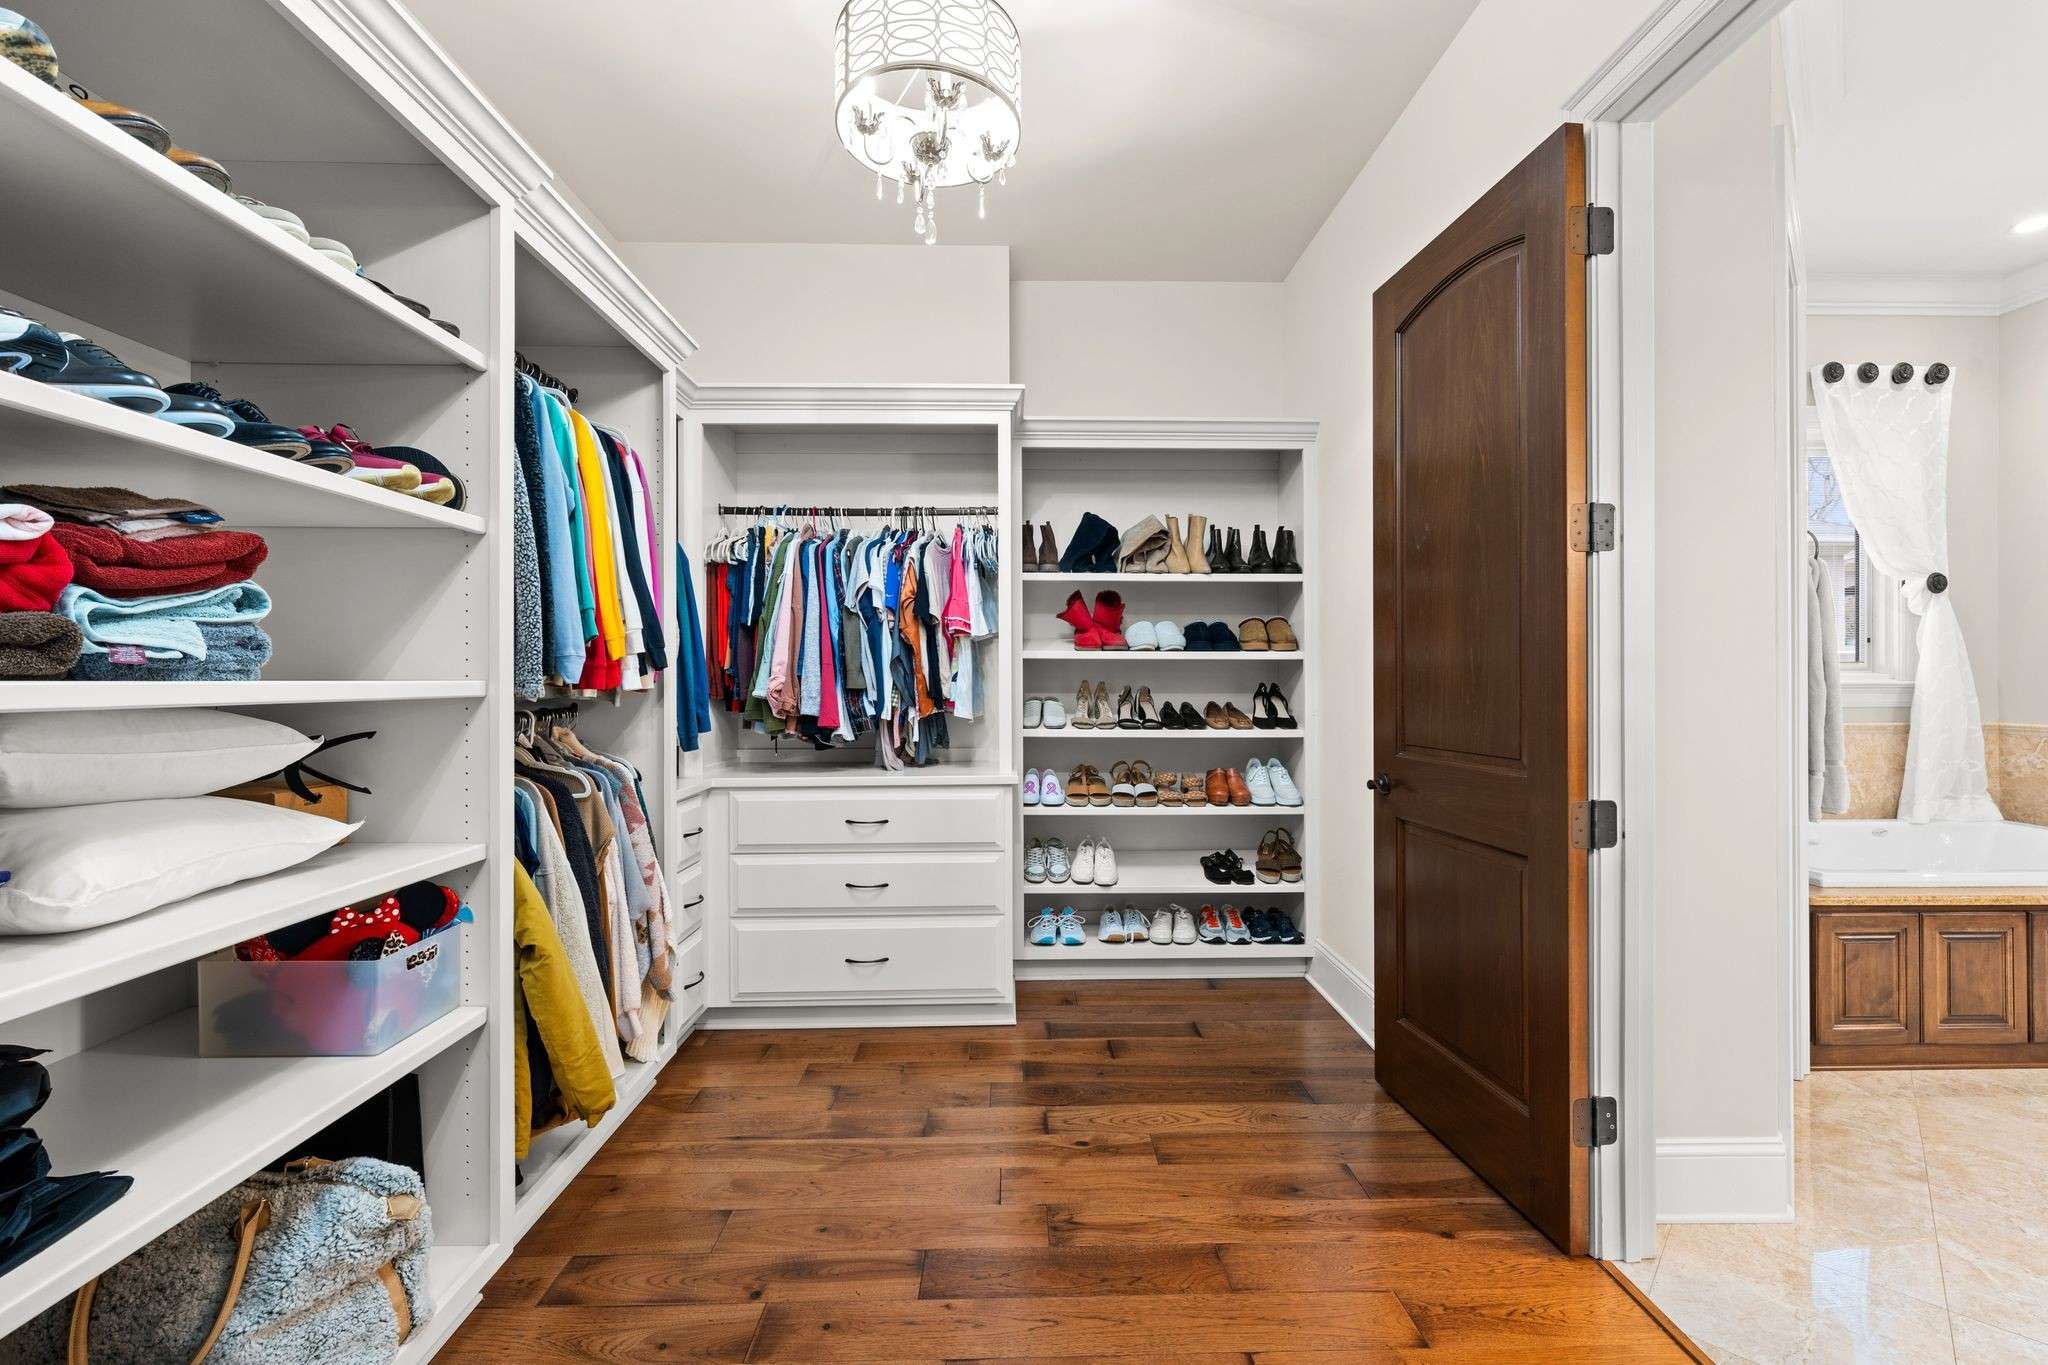 32 of 79. Interior Photo - 846 Armstrong Rd - Photo of Primary Closet off of Ensuite bathroom with custom builtins